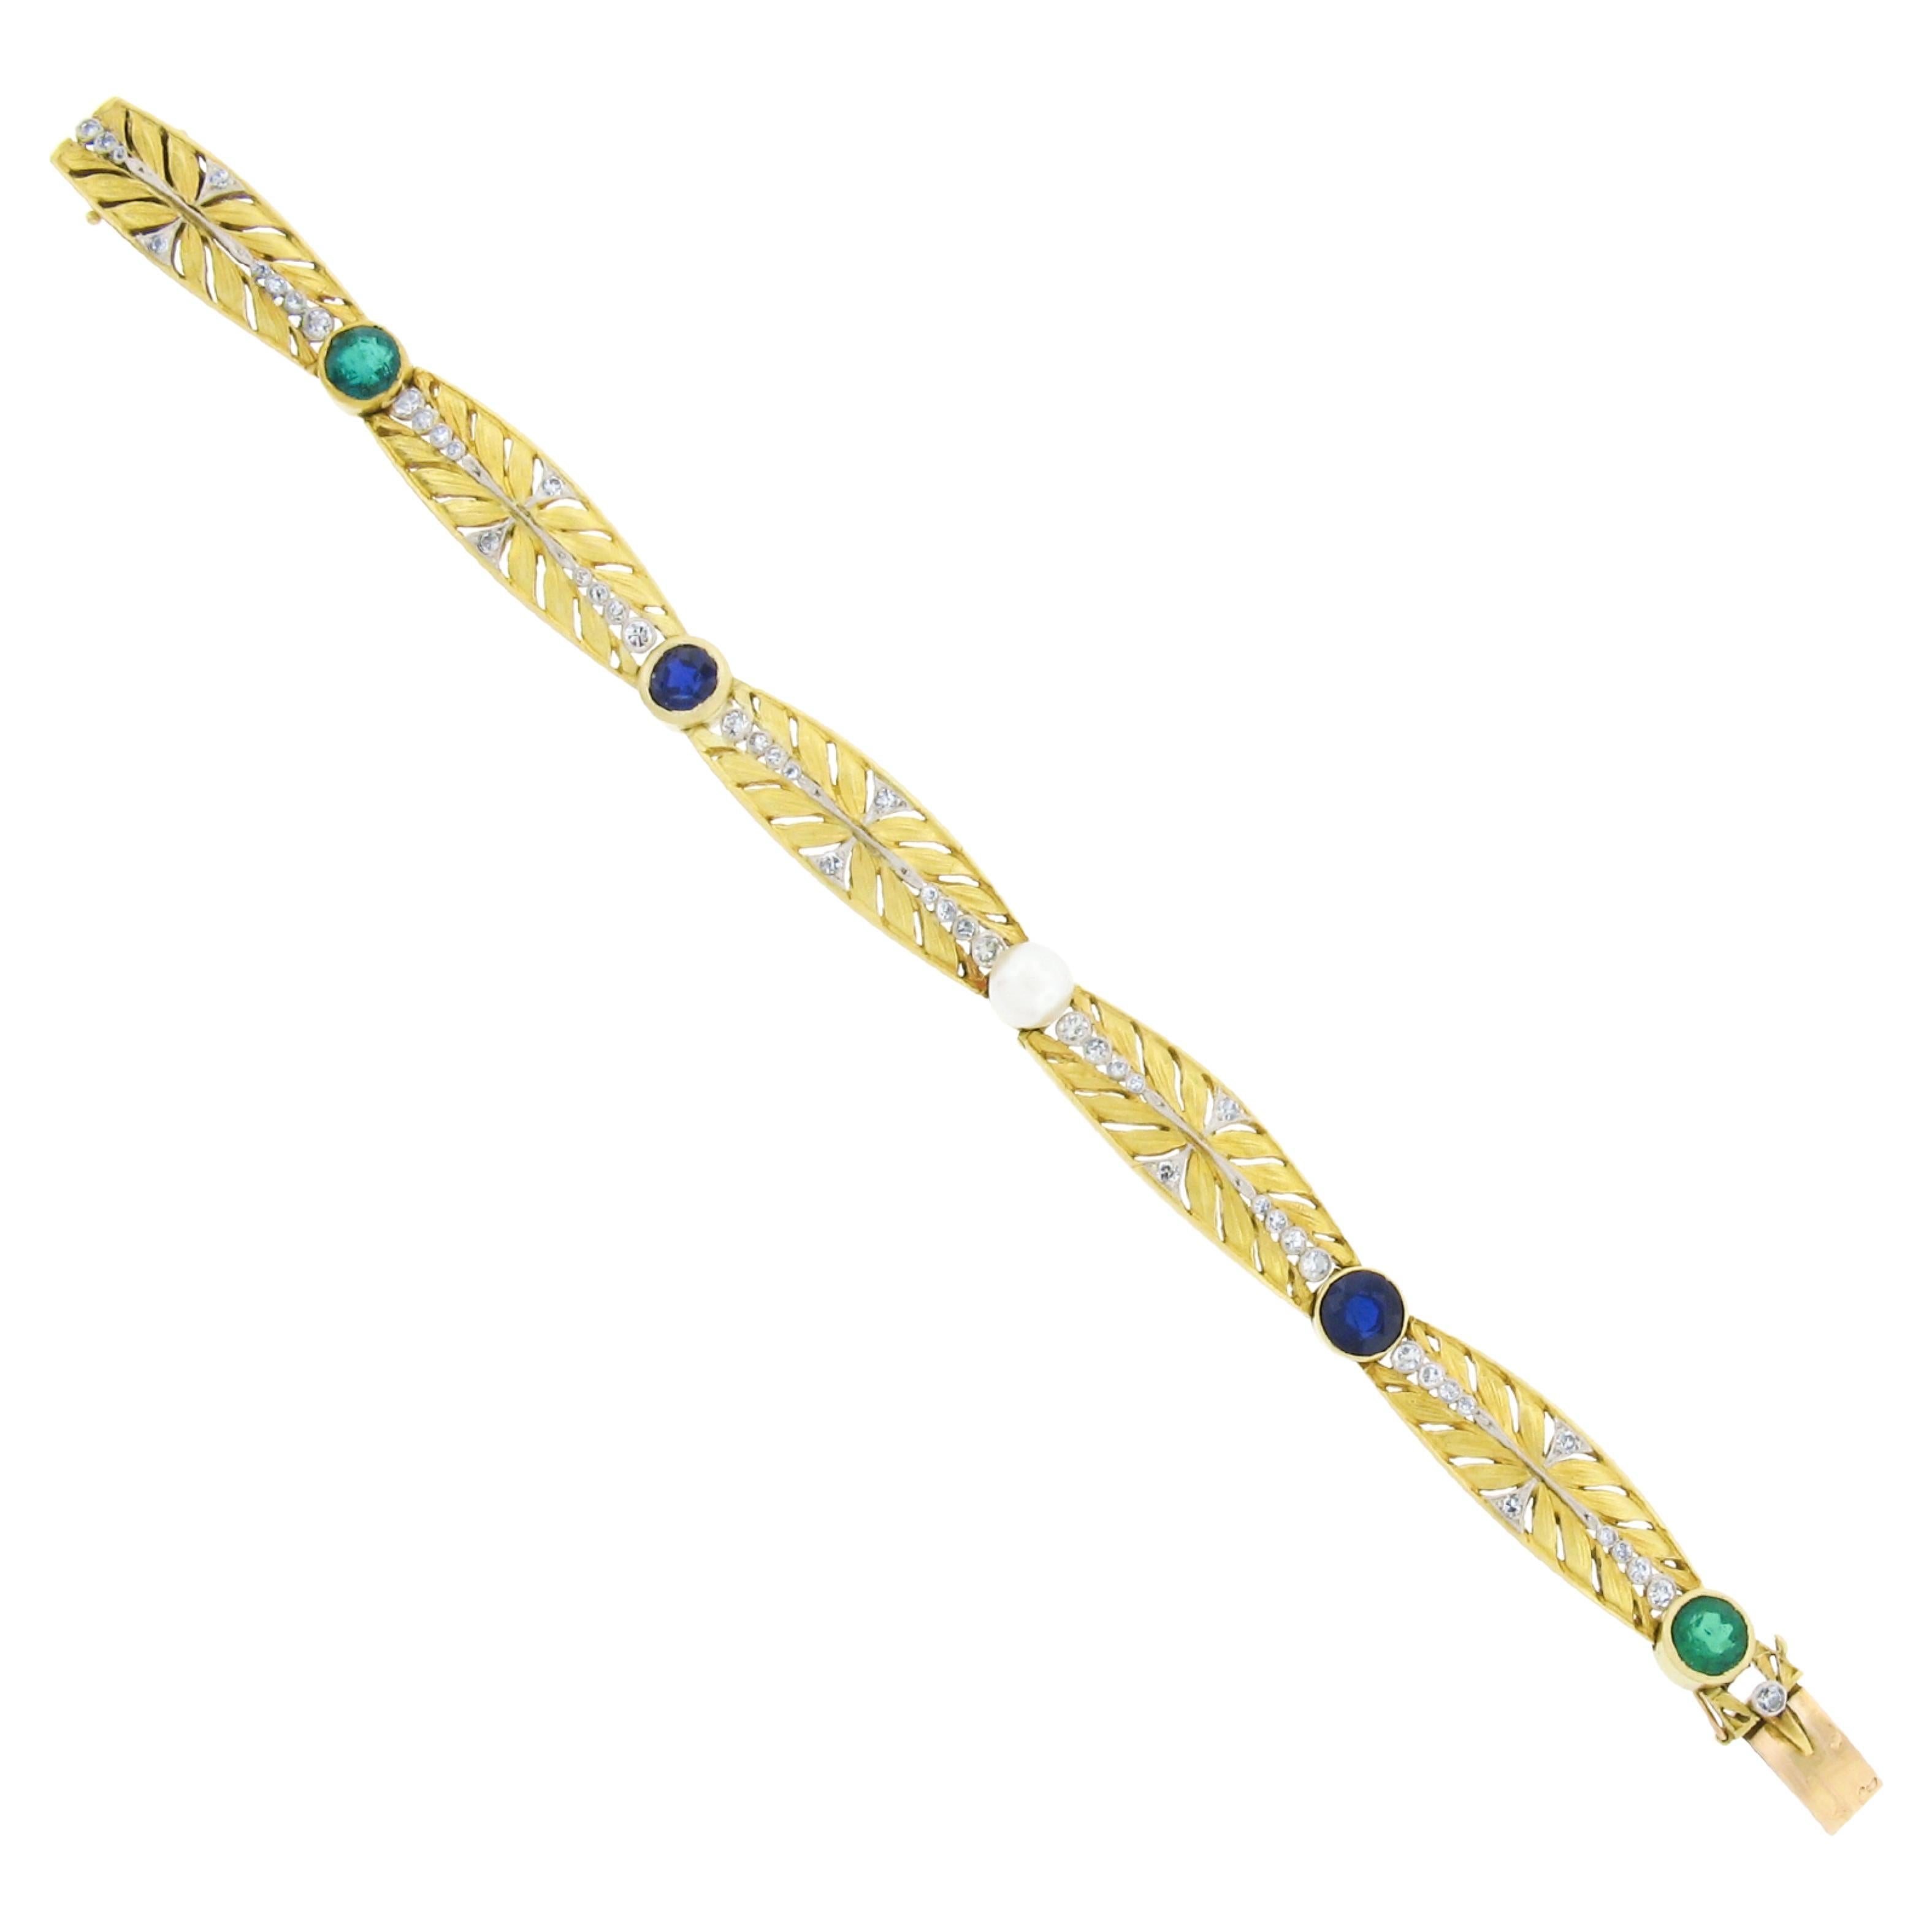 Antique French 18k Gold Plat, GIA Pearl Sapphire Emerald Engraved Link Bracelet For Sale